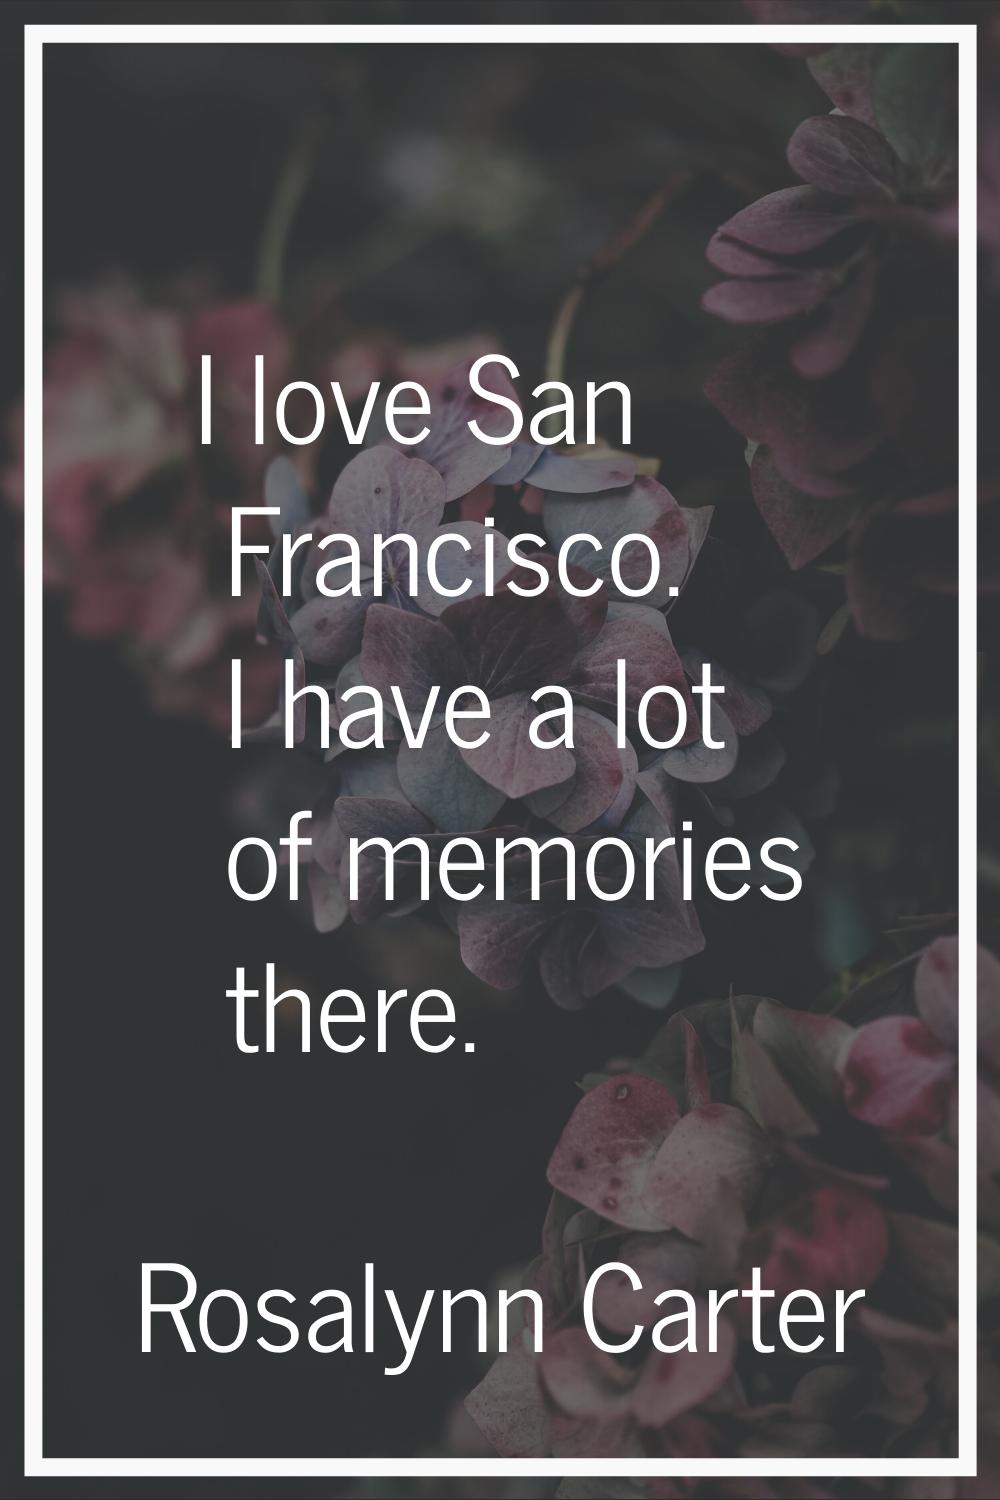 I love San Francisco. I have a lot of memories there.